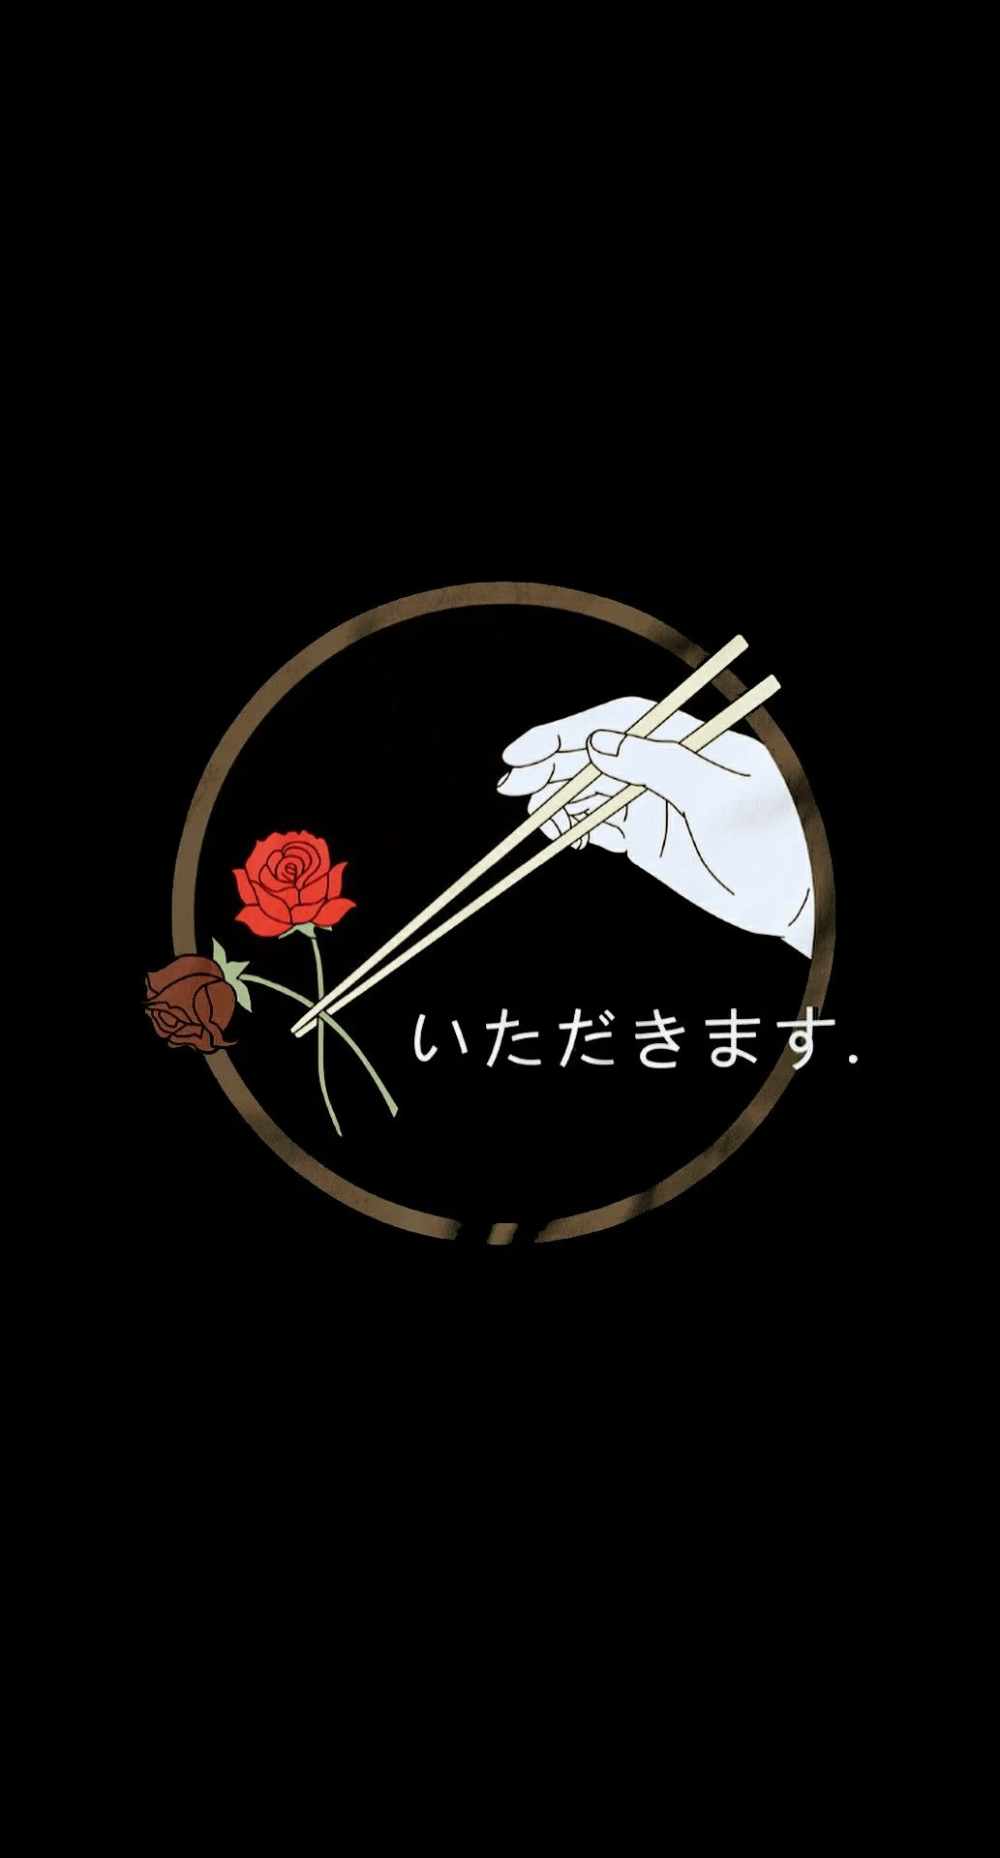 A black and white image of chopsticks holding up two roses - Japanese